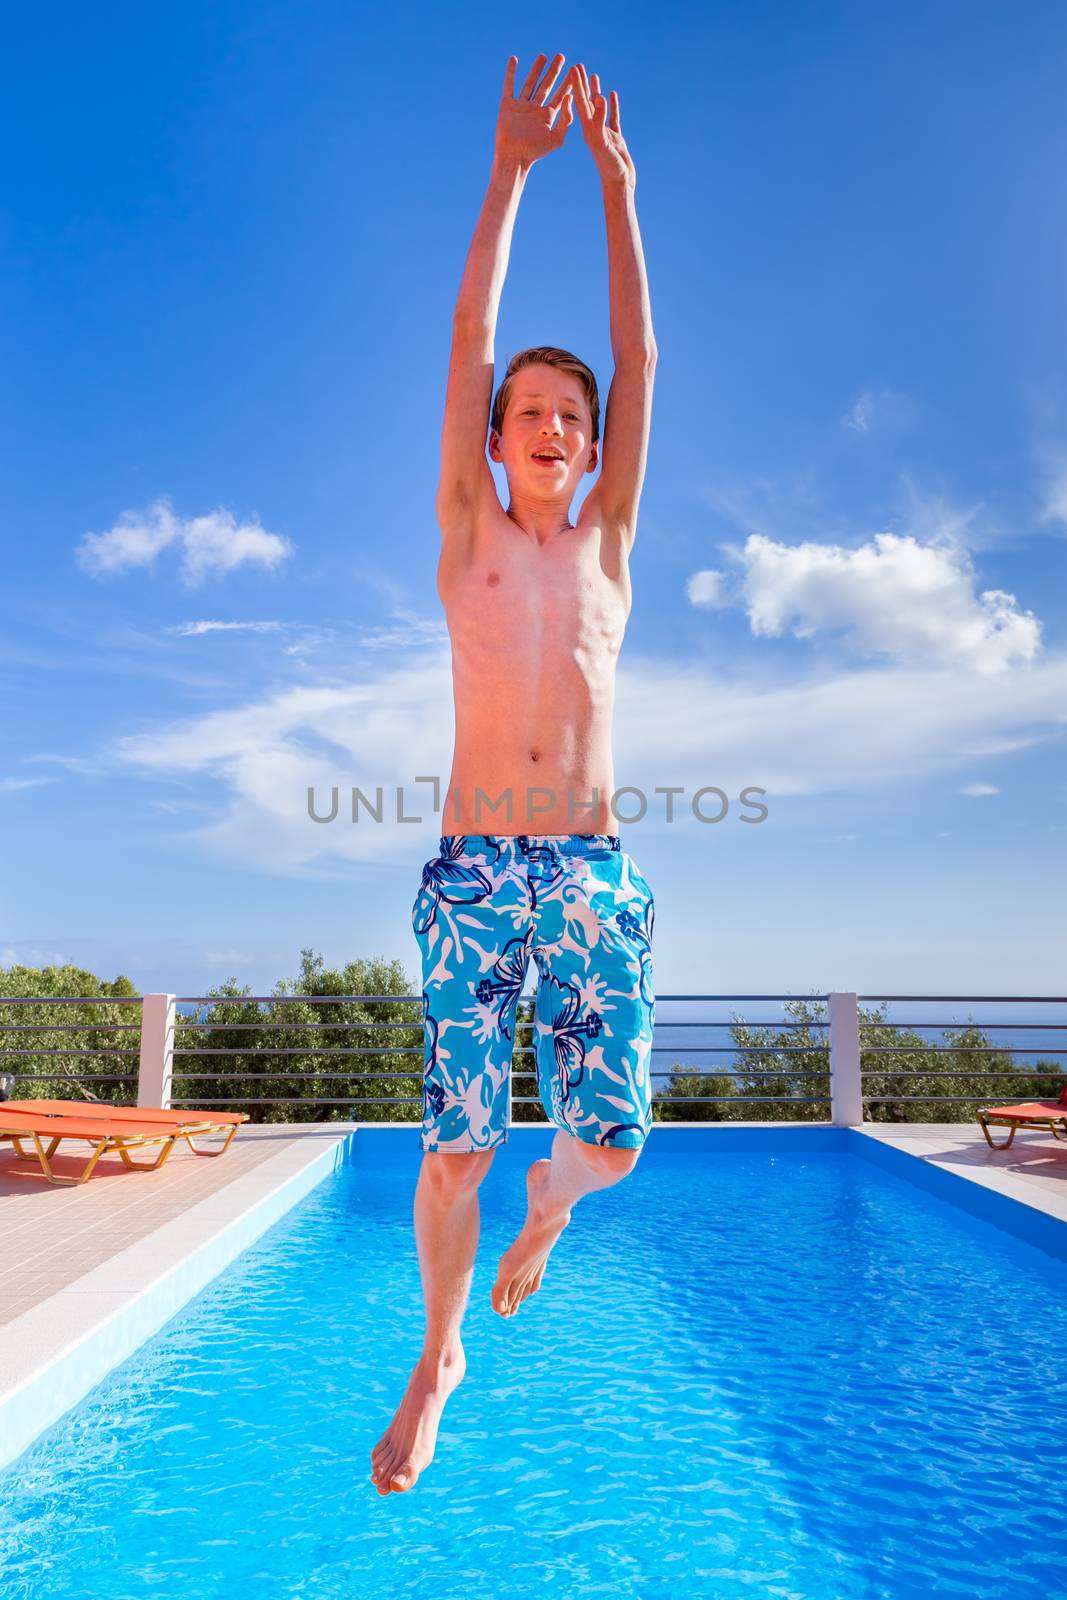 Dutch teenage boy jumping high above blue swimming pool by BenSchonewille